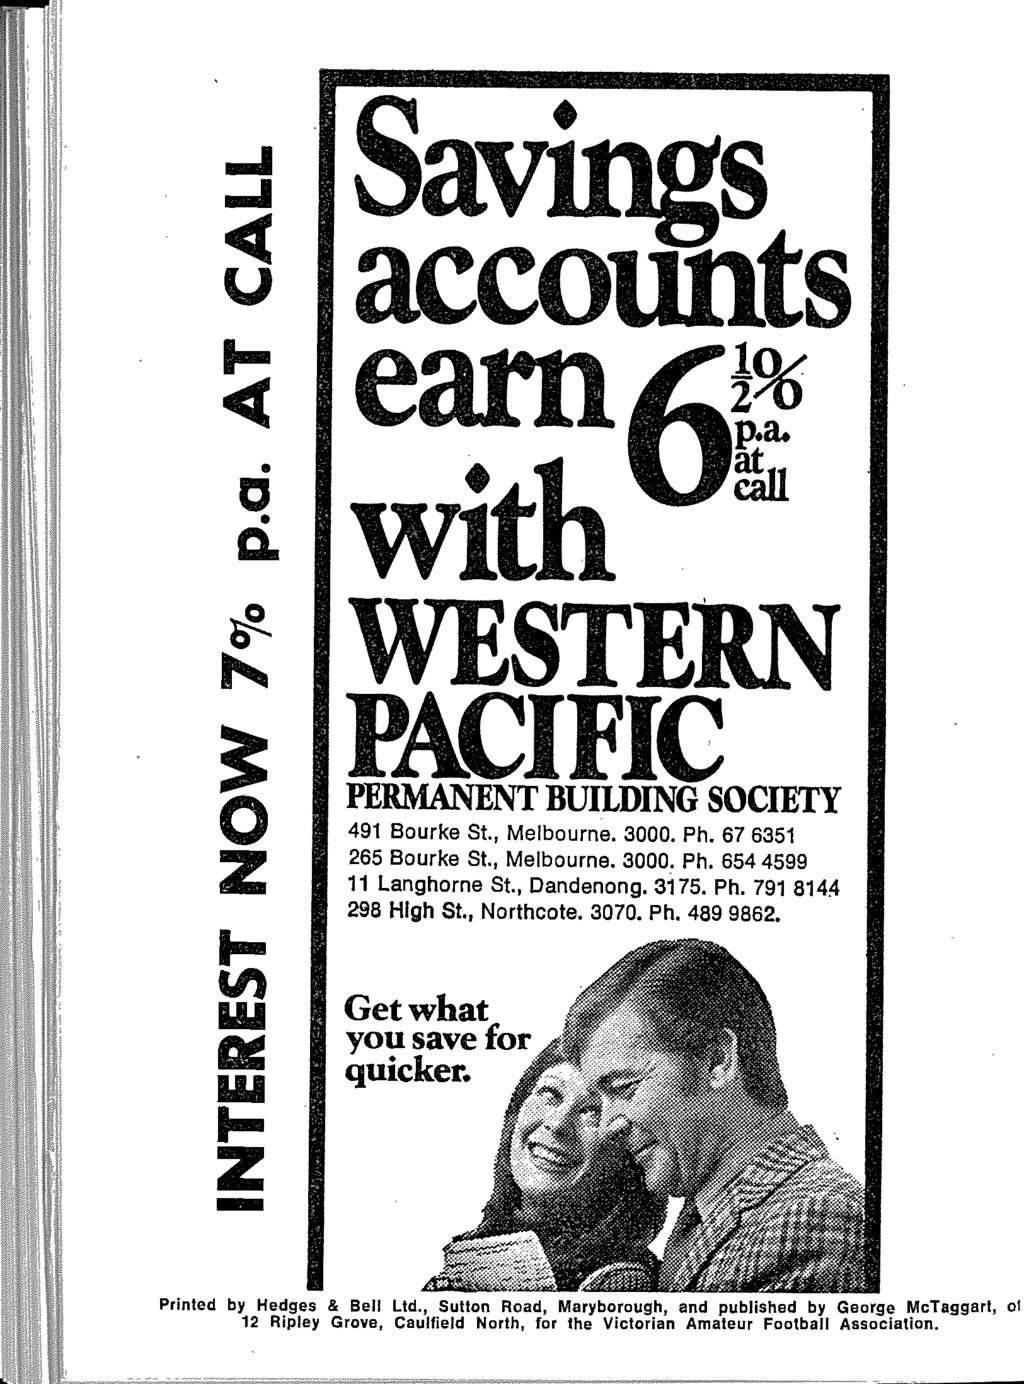 Q 4yings accotihts % carn ~ 69ff 0 9 WESTtJIM PAC1F1'r%n,,.. "m PERMANENT BUILDING SOCIETY 491 Bourke St., Melbourne. 3000. Ph. 67 6351 265 Bourke St., Melbourne. 3000. Ph. 654 4599 11 Langhorne St.